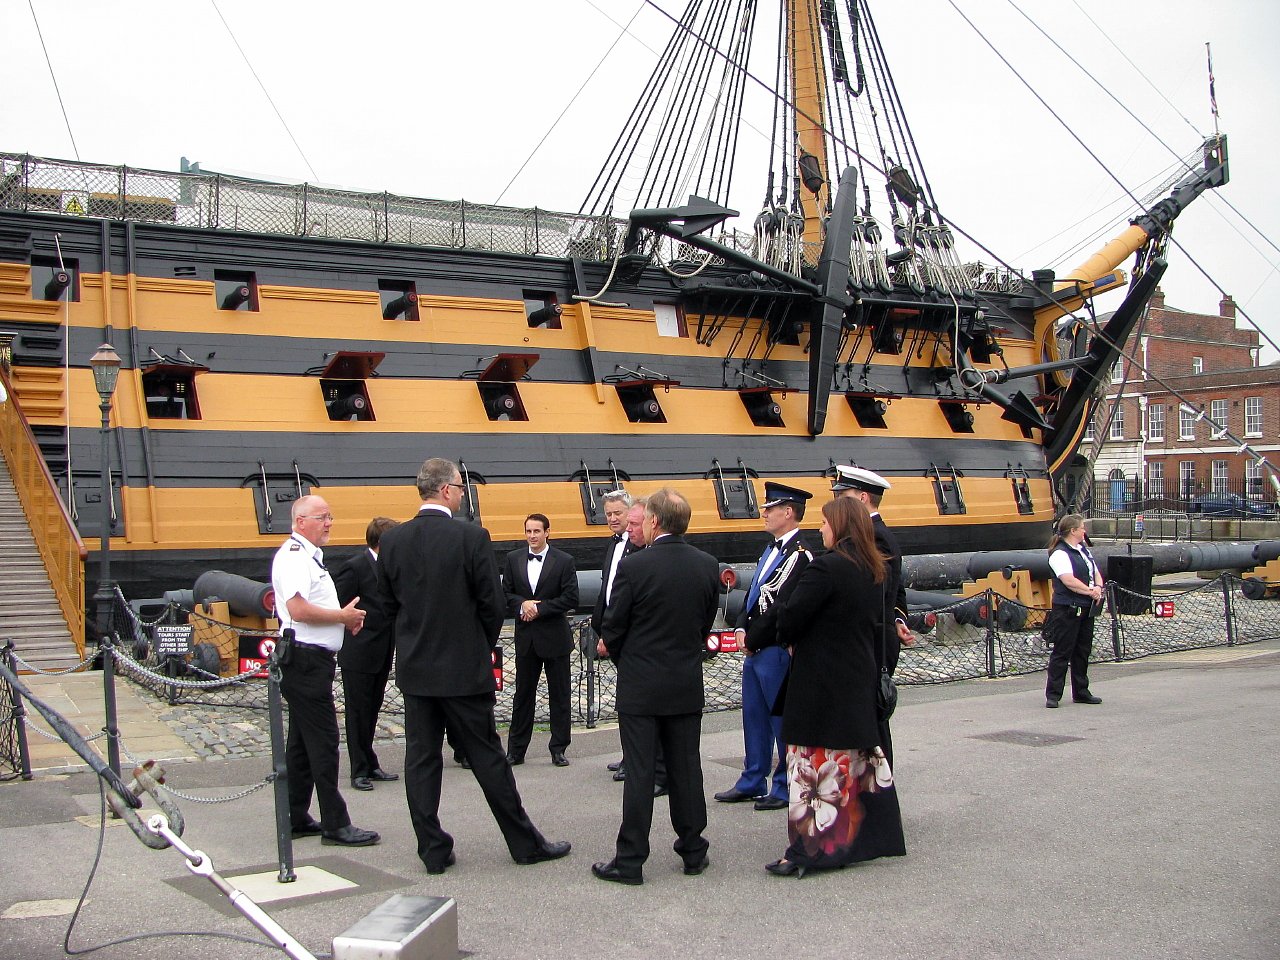 Project+Vernon+charity+dinner+on+board+HMS+Victory+11+Sep+2014+(5).jpg